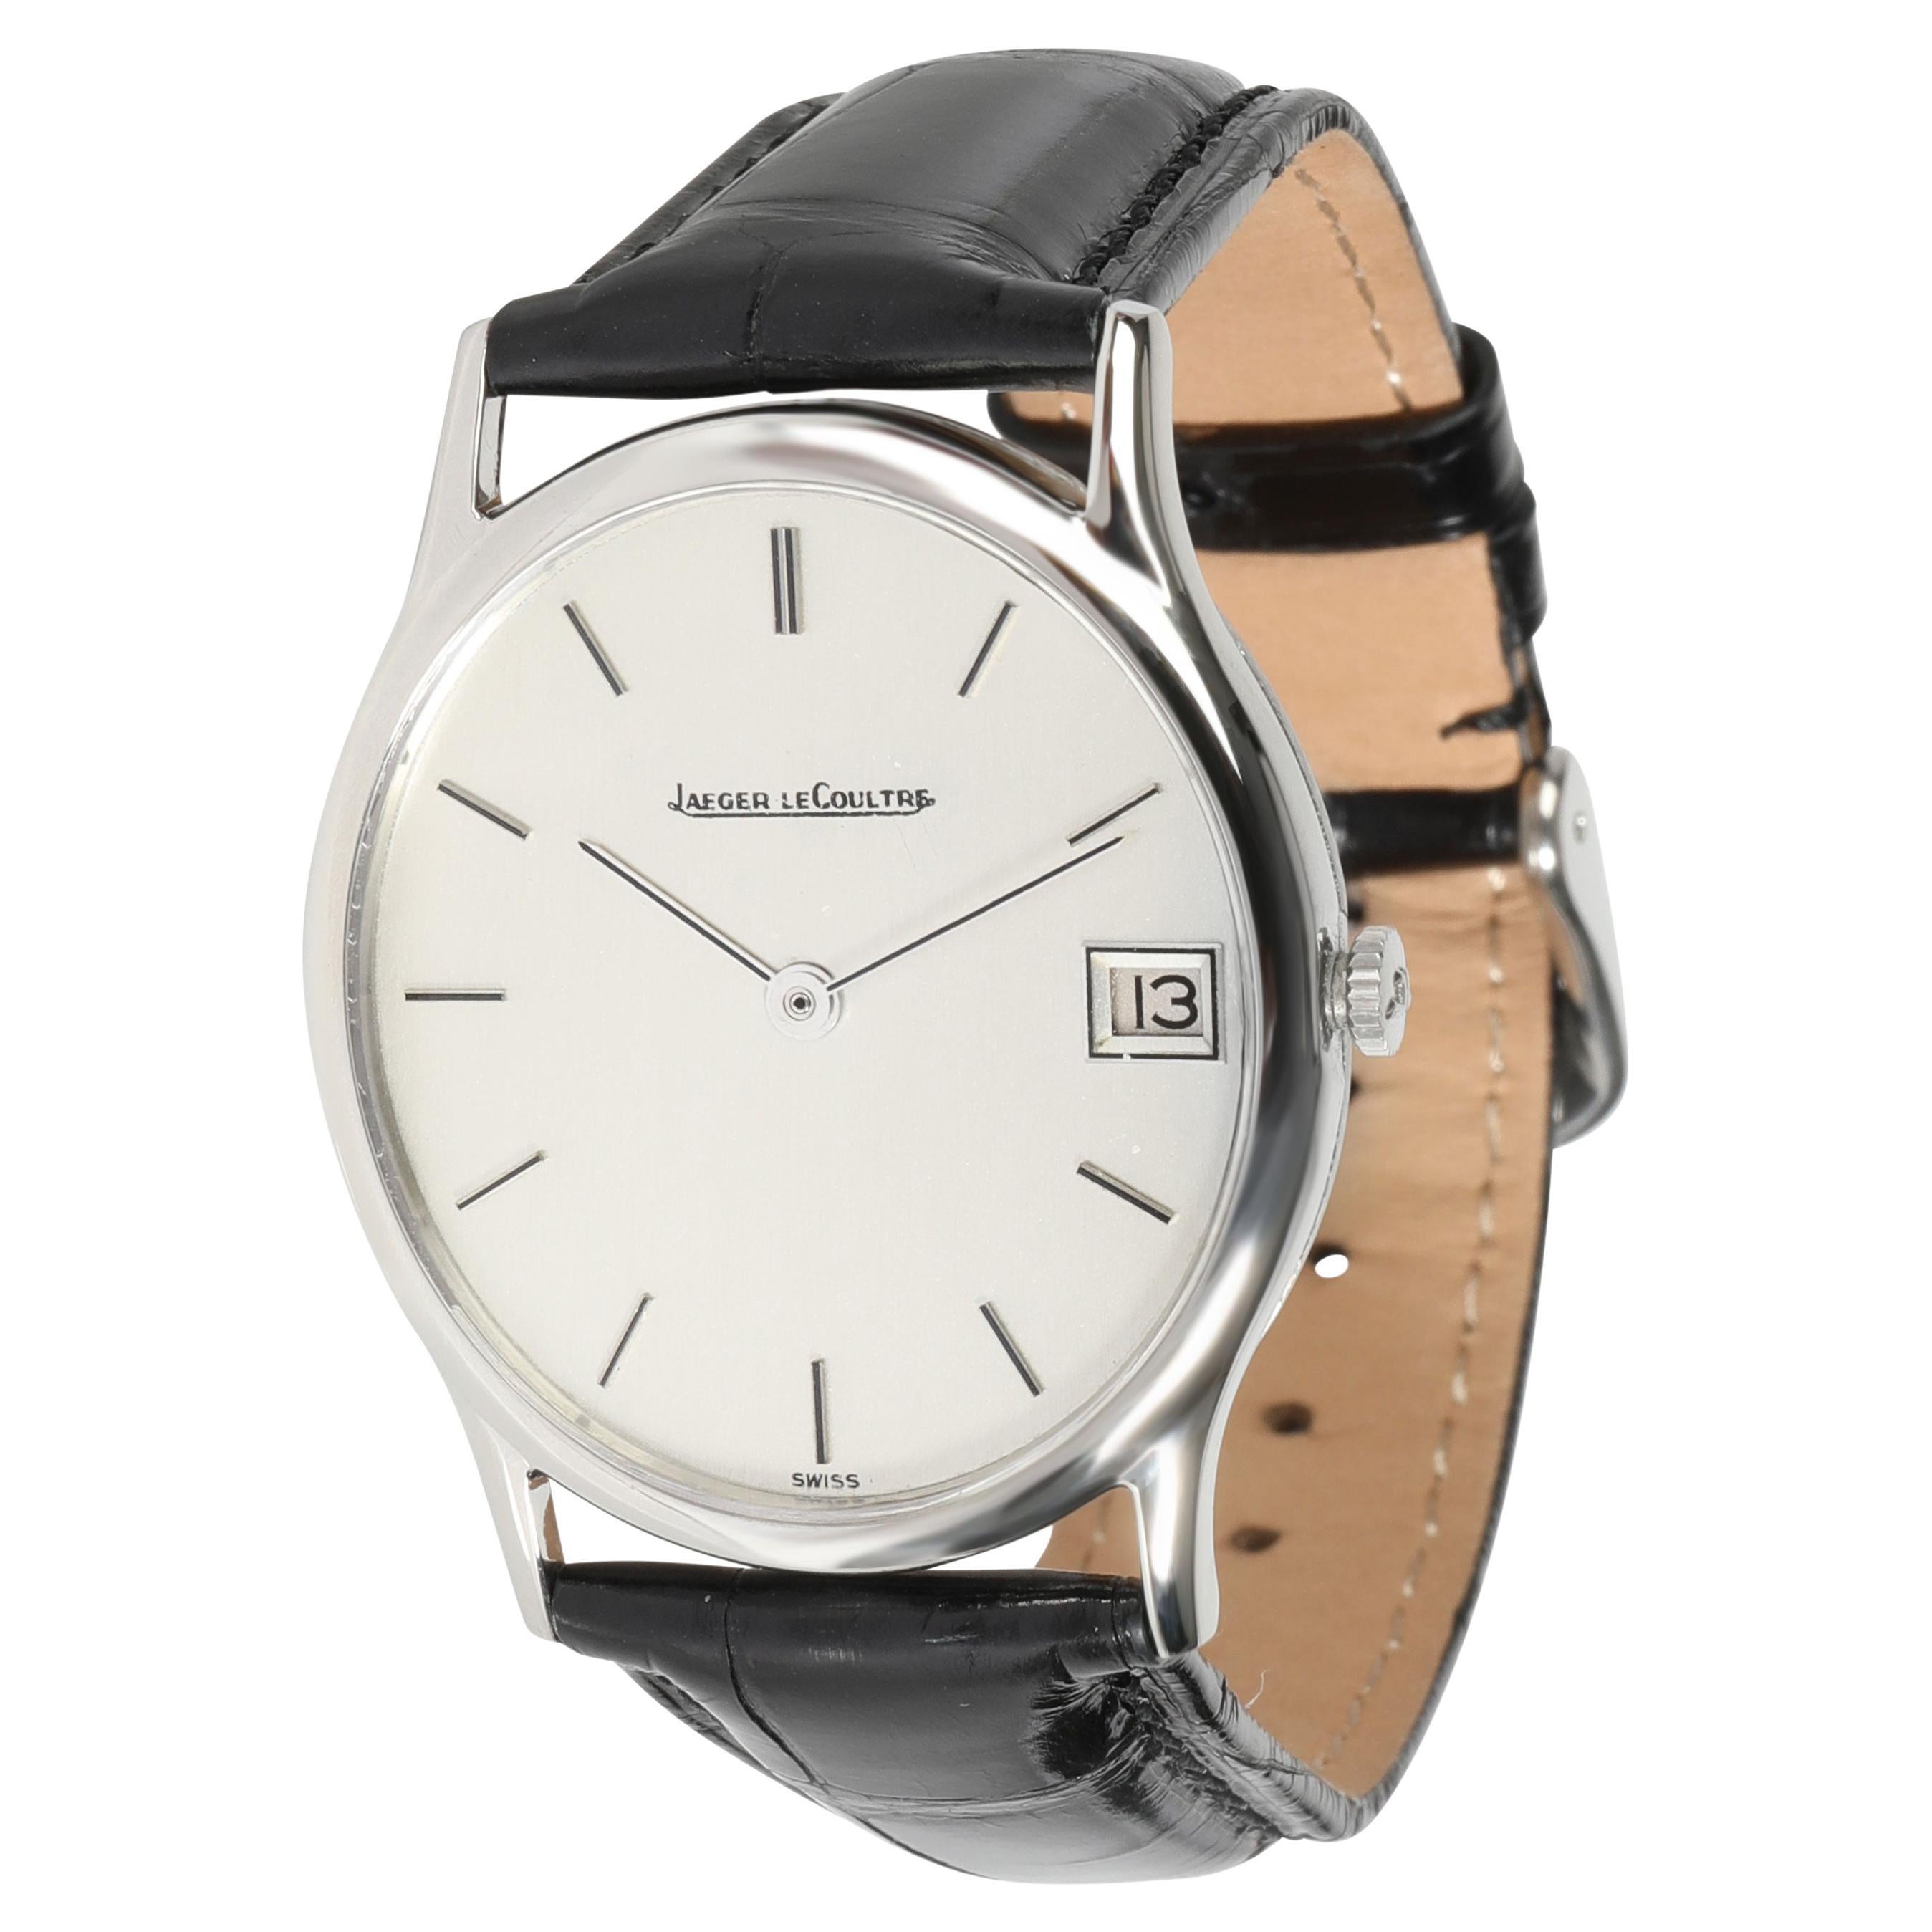 Jaeger-LeCoultre Oval Ellipse 5002.42 Unisex Watch in Stainless Steel